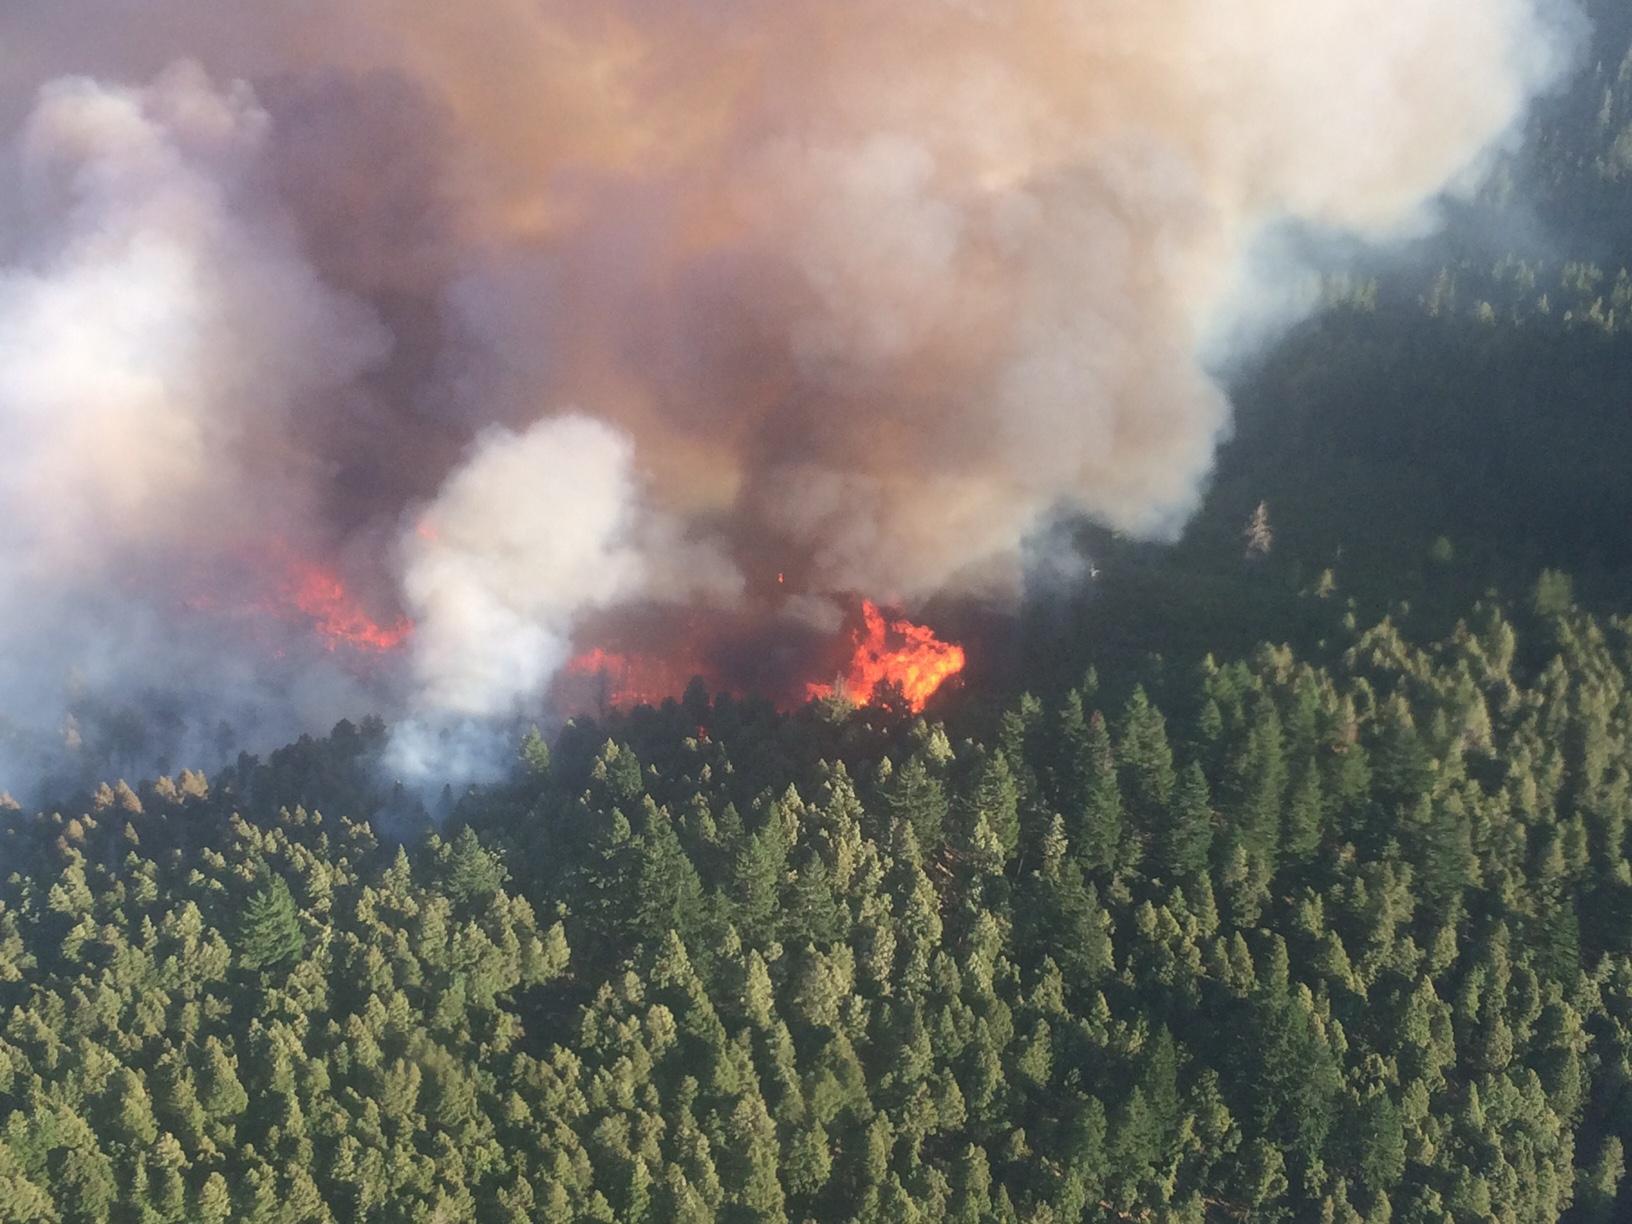 According to the Forest Service, the fire burning in the Kalmiopsis Wilderness in Southern Oregon has grown to 98,000 acres.